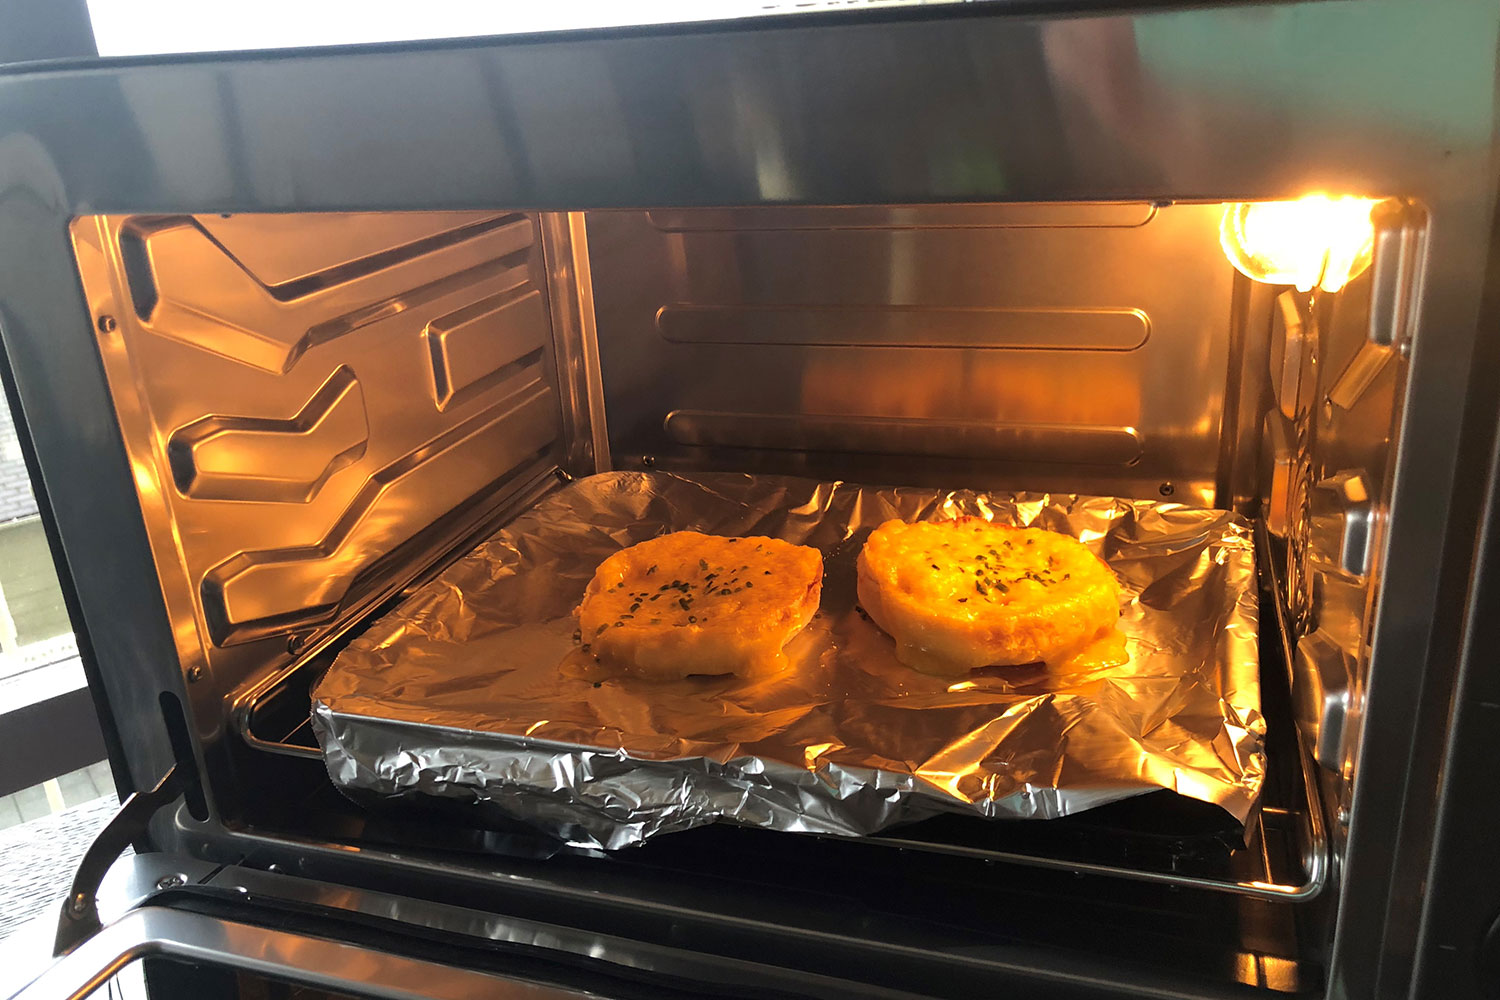 https://www.digitaltrends.com/wp-content/uploads/2018/11/tovala-steam-oven-review-12.jpg?fit=1500%2C1000&p=1